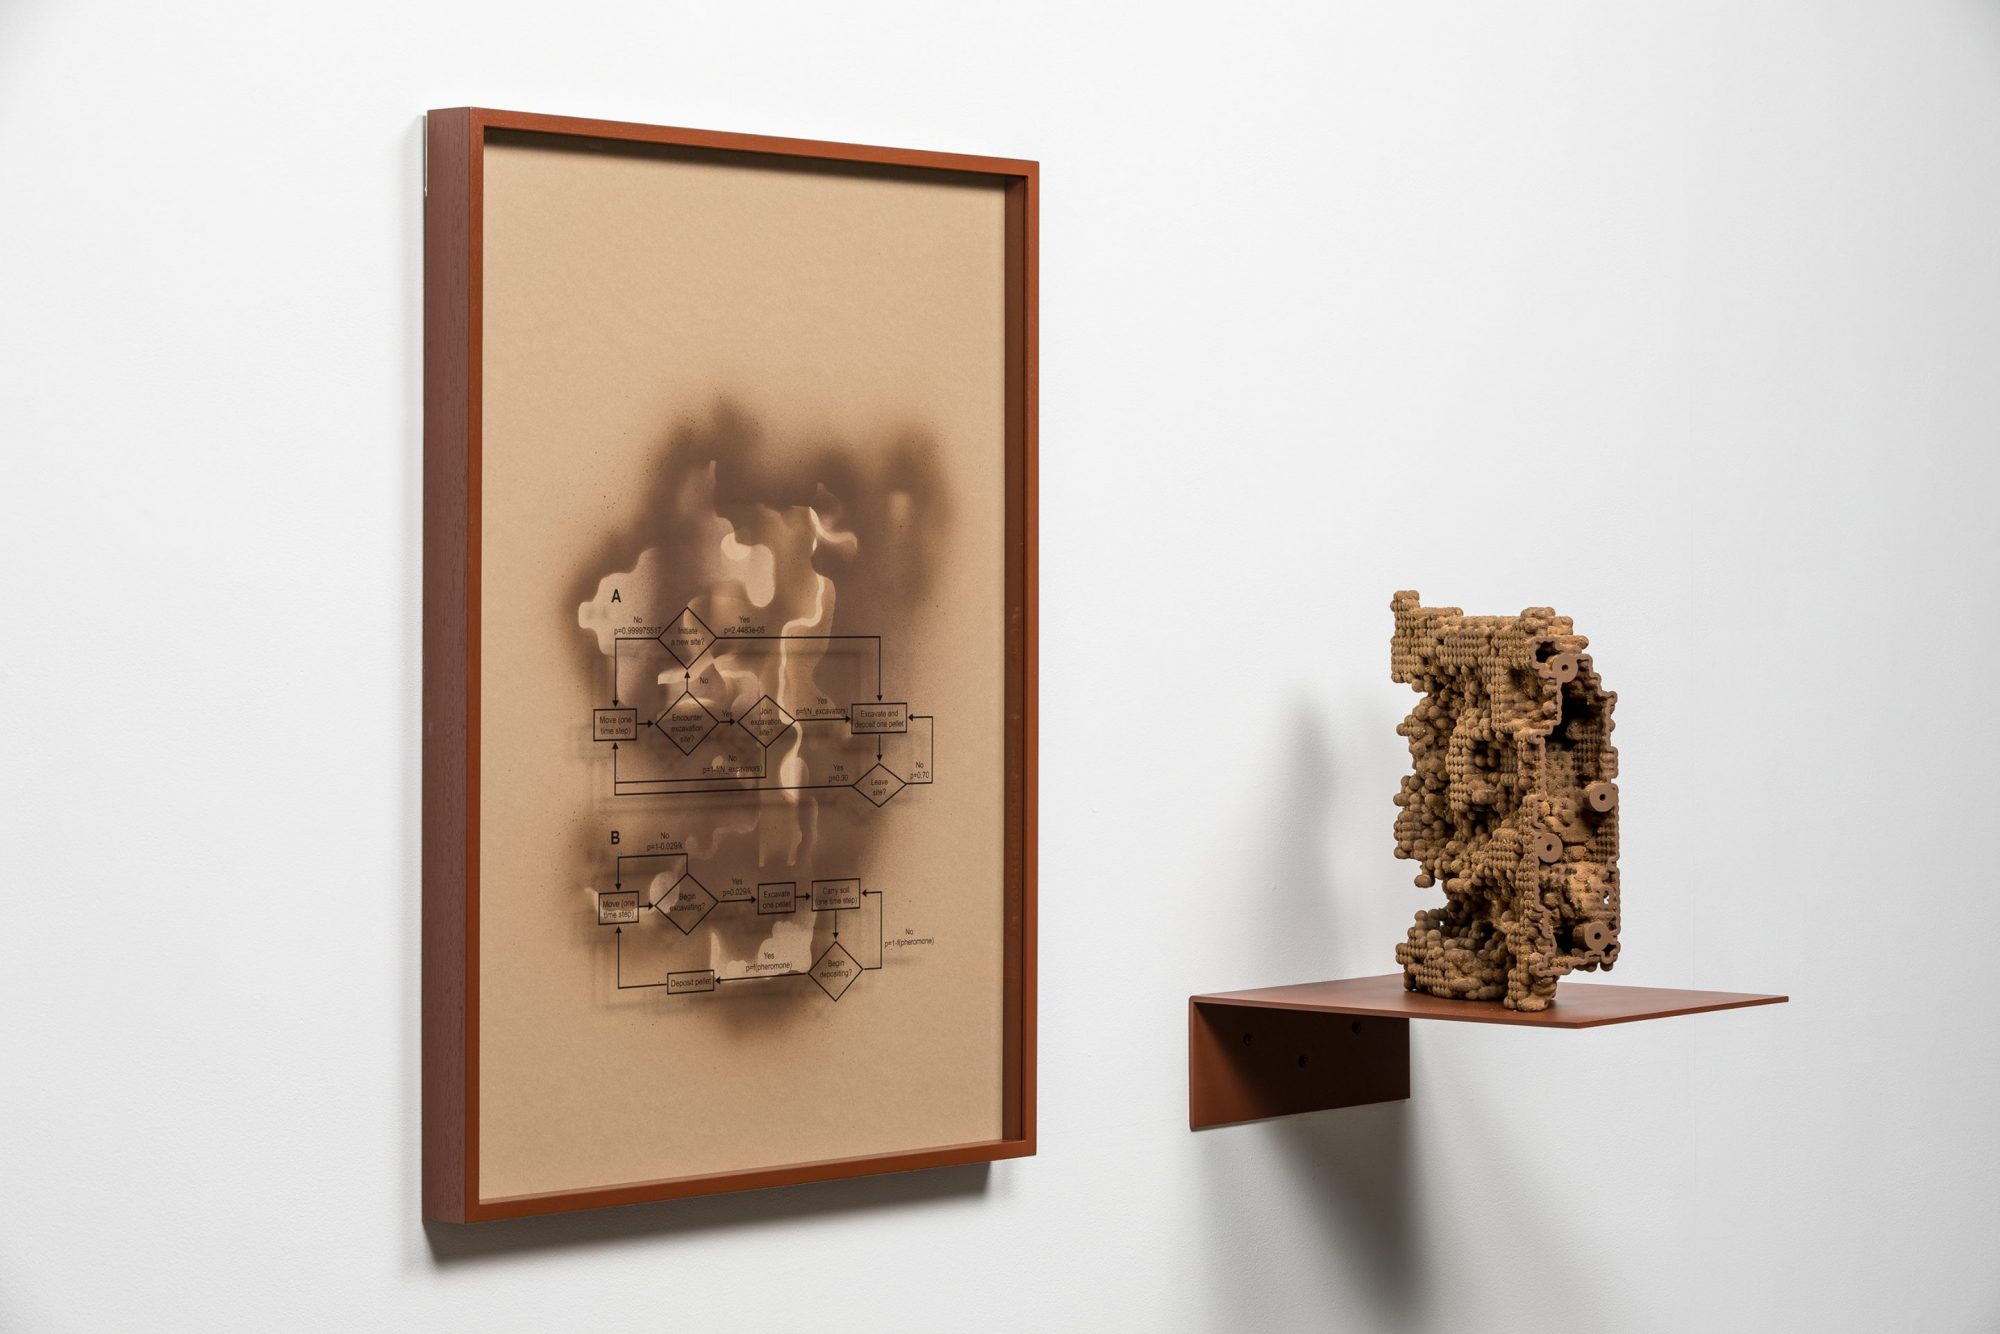 Nicholas Mangan, Termite Economies (Neural Nodes and Root Causes), 2020. Installation view. Photography: Andrew Curtis.